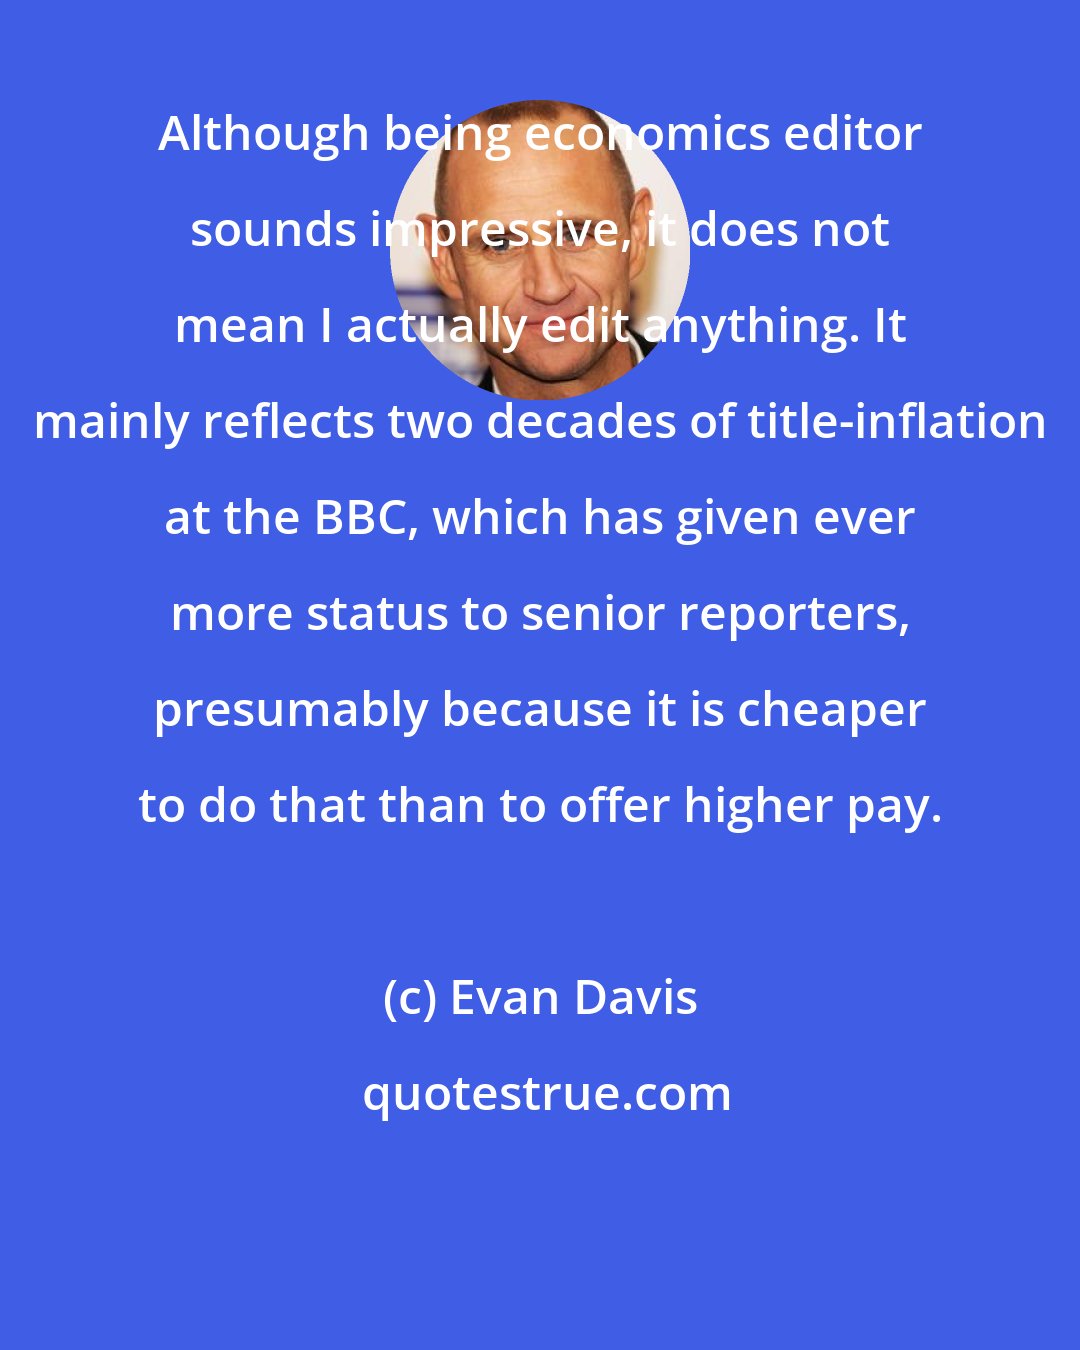 Evan Davis: Although being economics editor sounds impressive, it does not mean I actually edit anything. It mainly reflects two decades of title-inflation at the BBC, which has given ever more status to senior reporters, presumably because it is cheaper to do that than to offer higher pay.